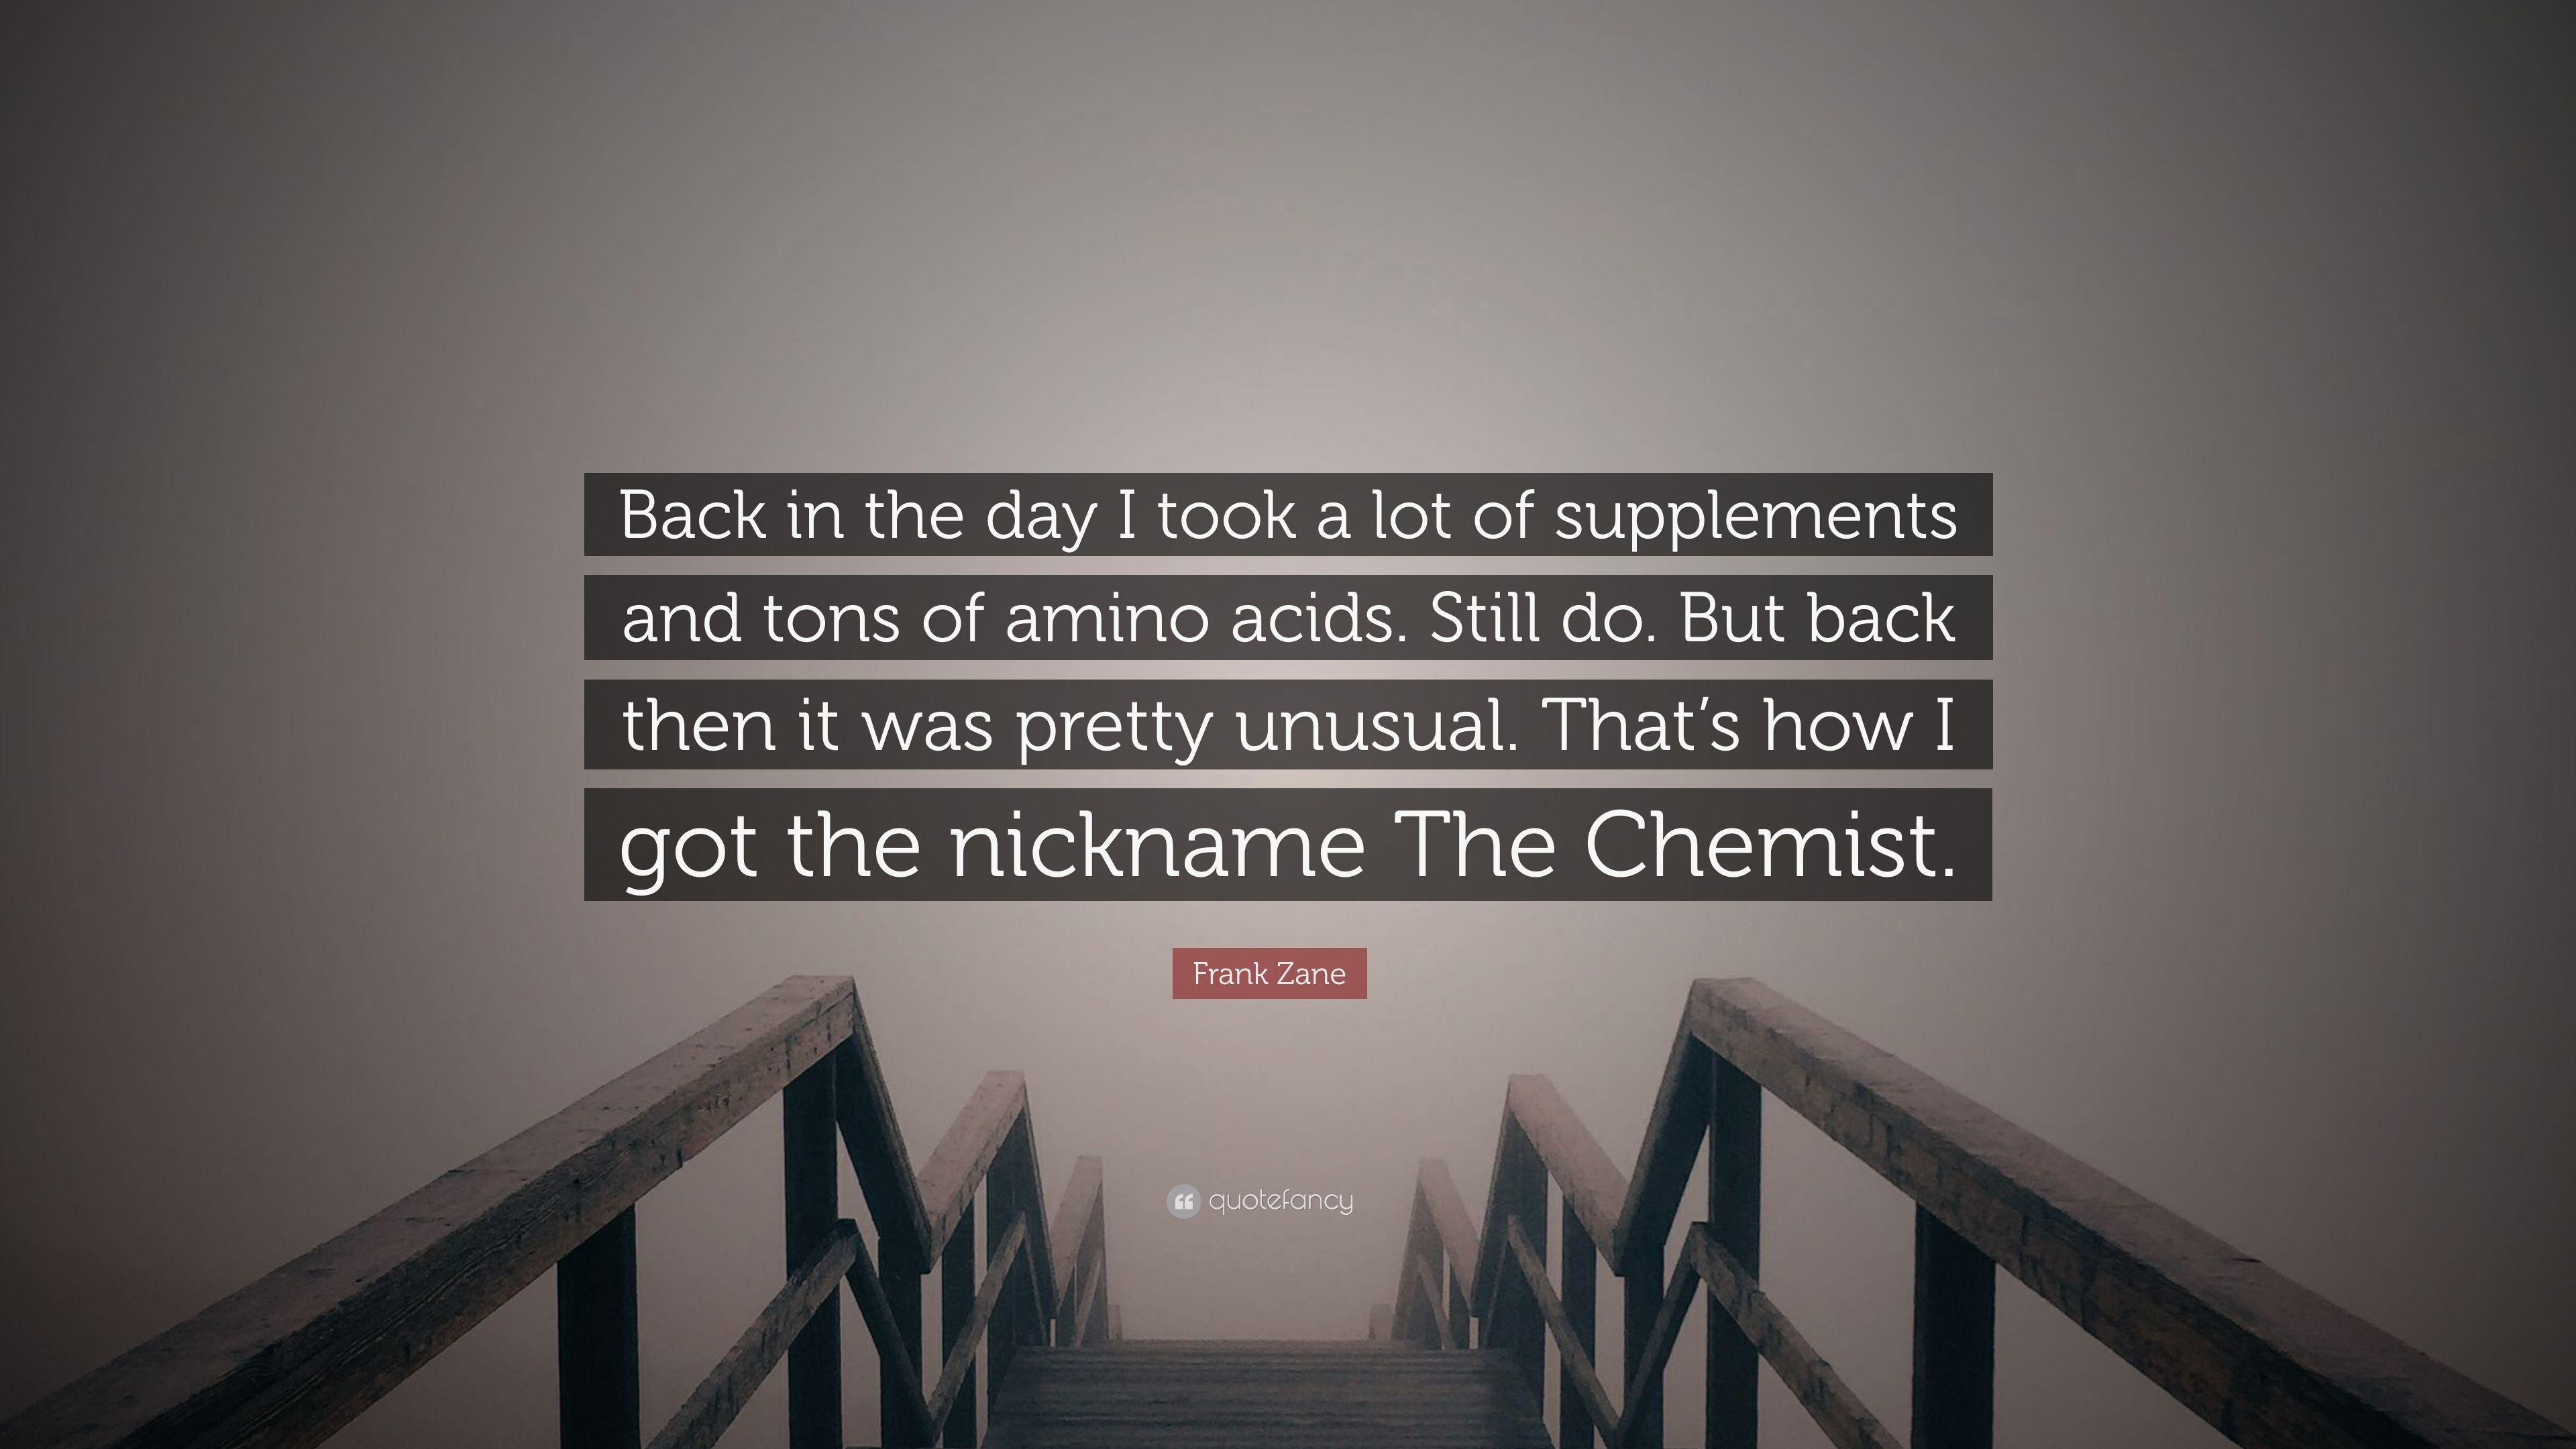 Frank Zane Quote: “Back in the day I took a lot of supplements